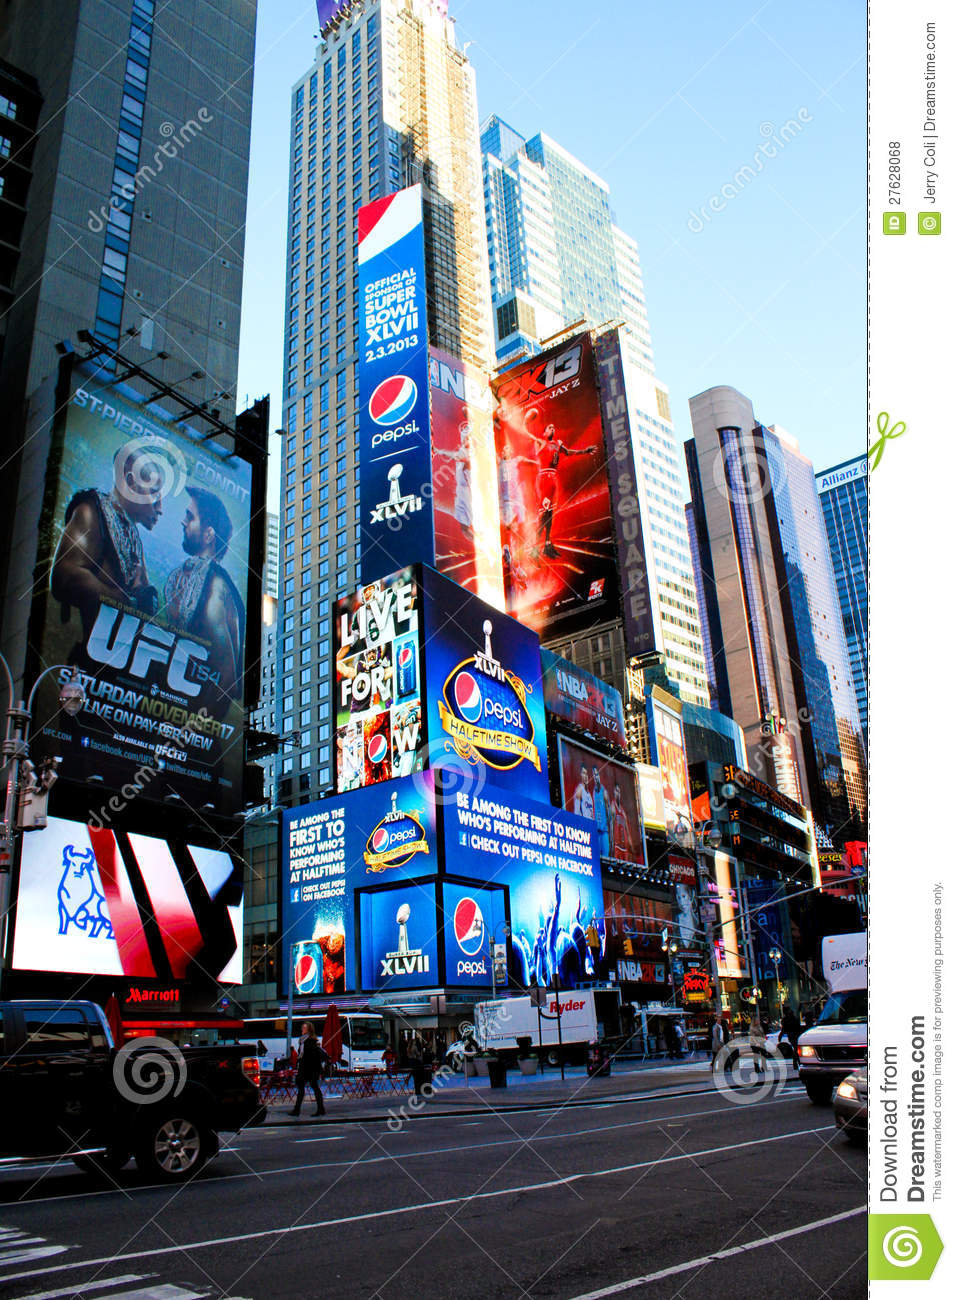 Pepsi Superbowl Xlvii Advertisement In Times Sq  Editorial Stock Photo